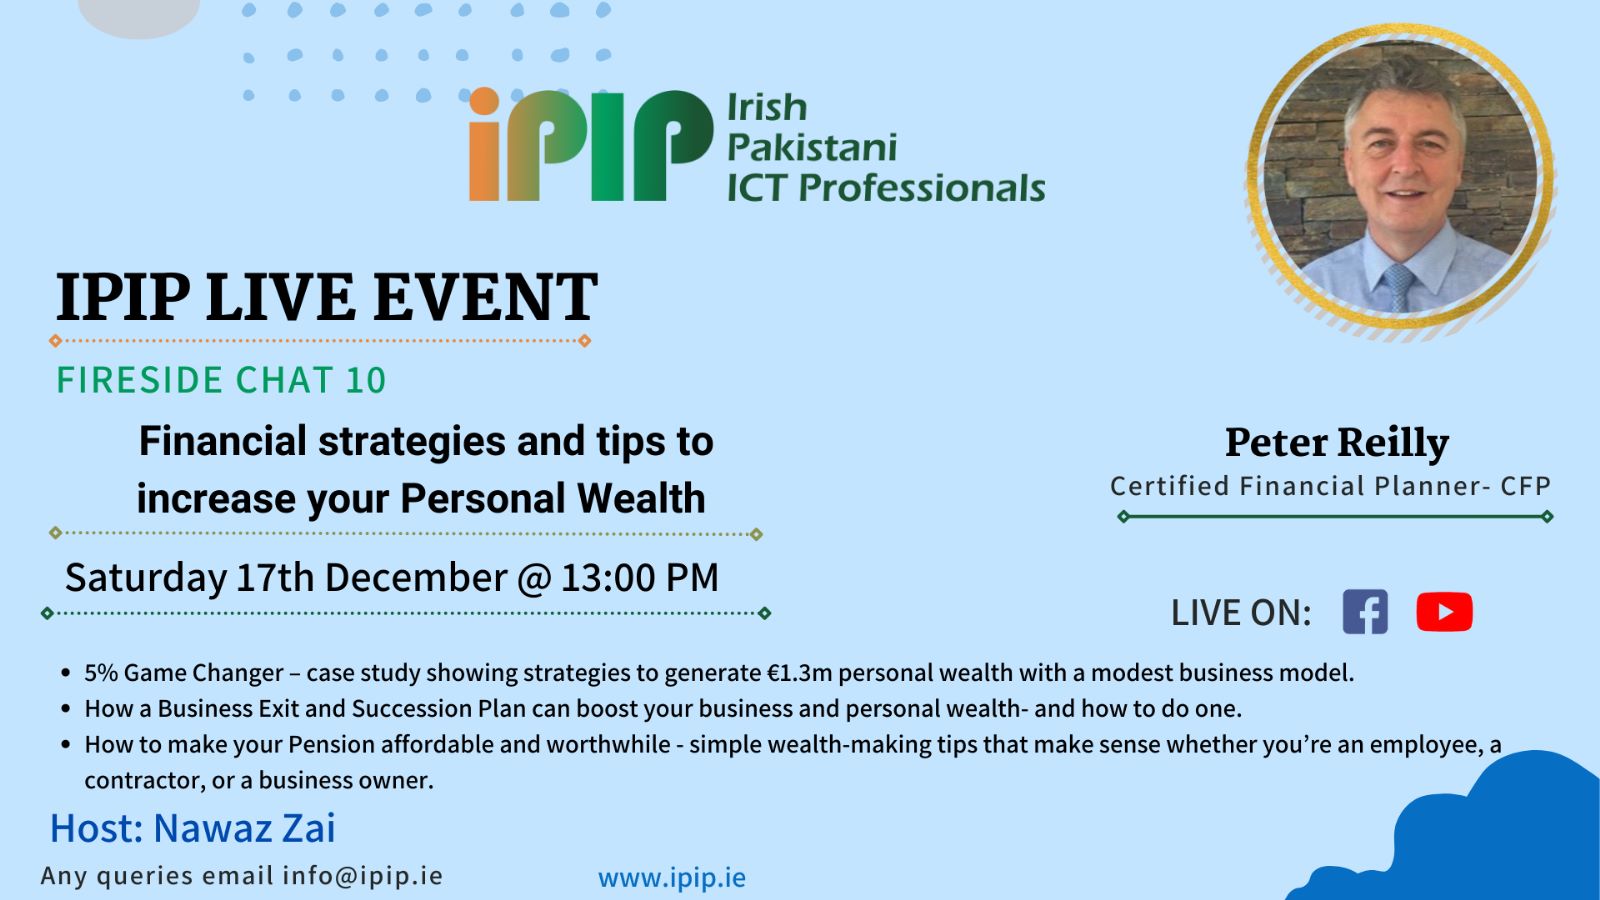 IPIP Fireside Chat on  Financial Strategies and Tips to increase your personal wealth